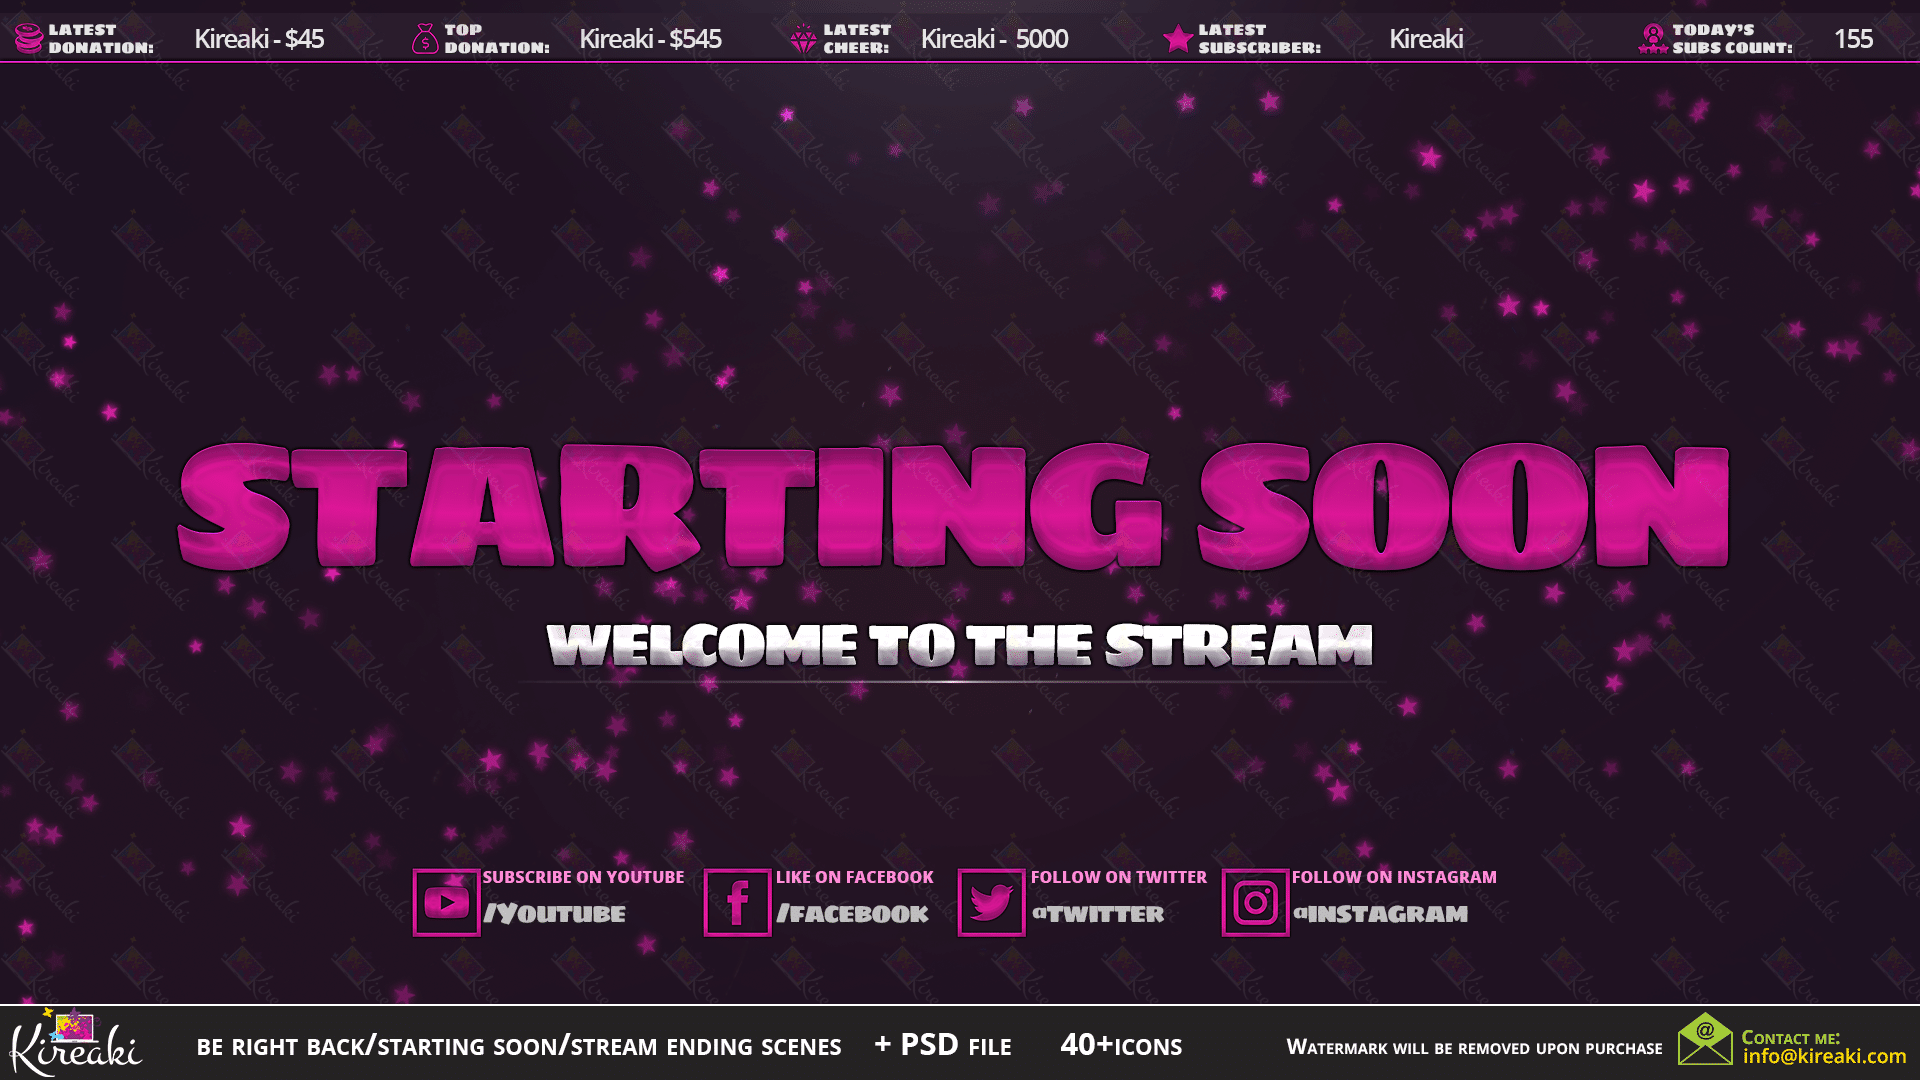 DexPixel. Animated Twitch Overlays & Alerts. Streaming, Scenes, Pink stars